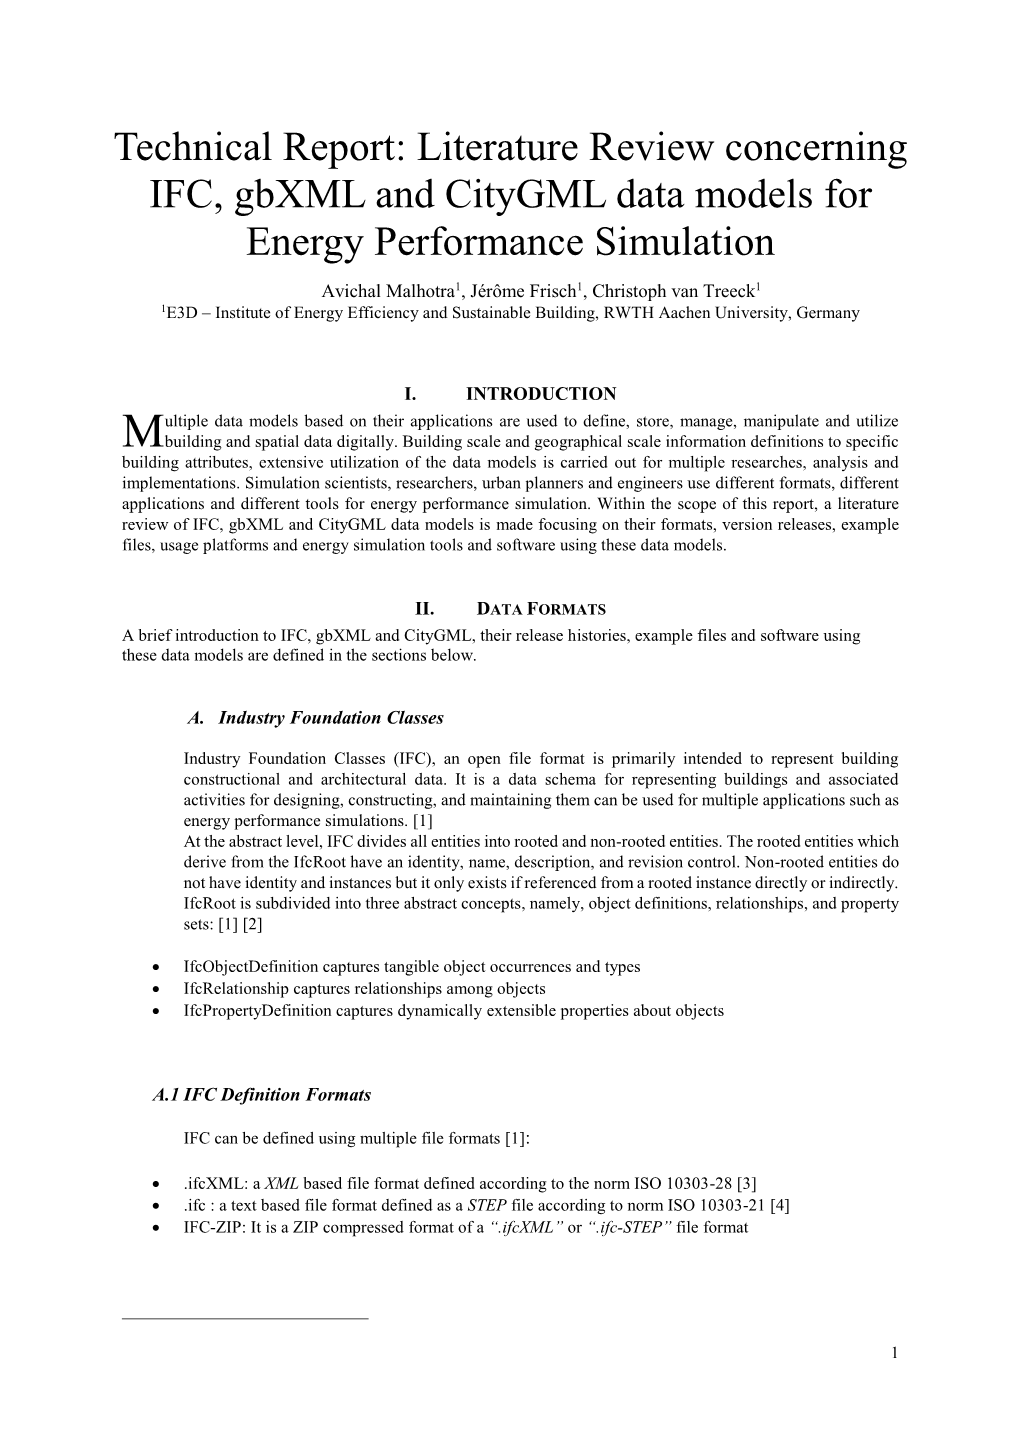 Literature Review Concerning IFC, Gbxml and Citygml Data Models for Energy Performance Simulation